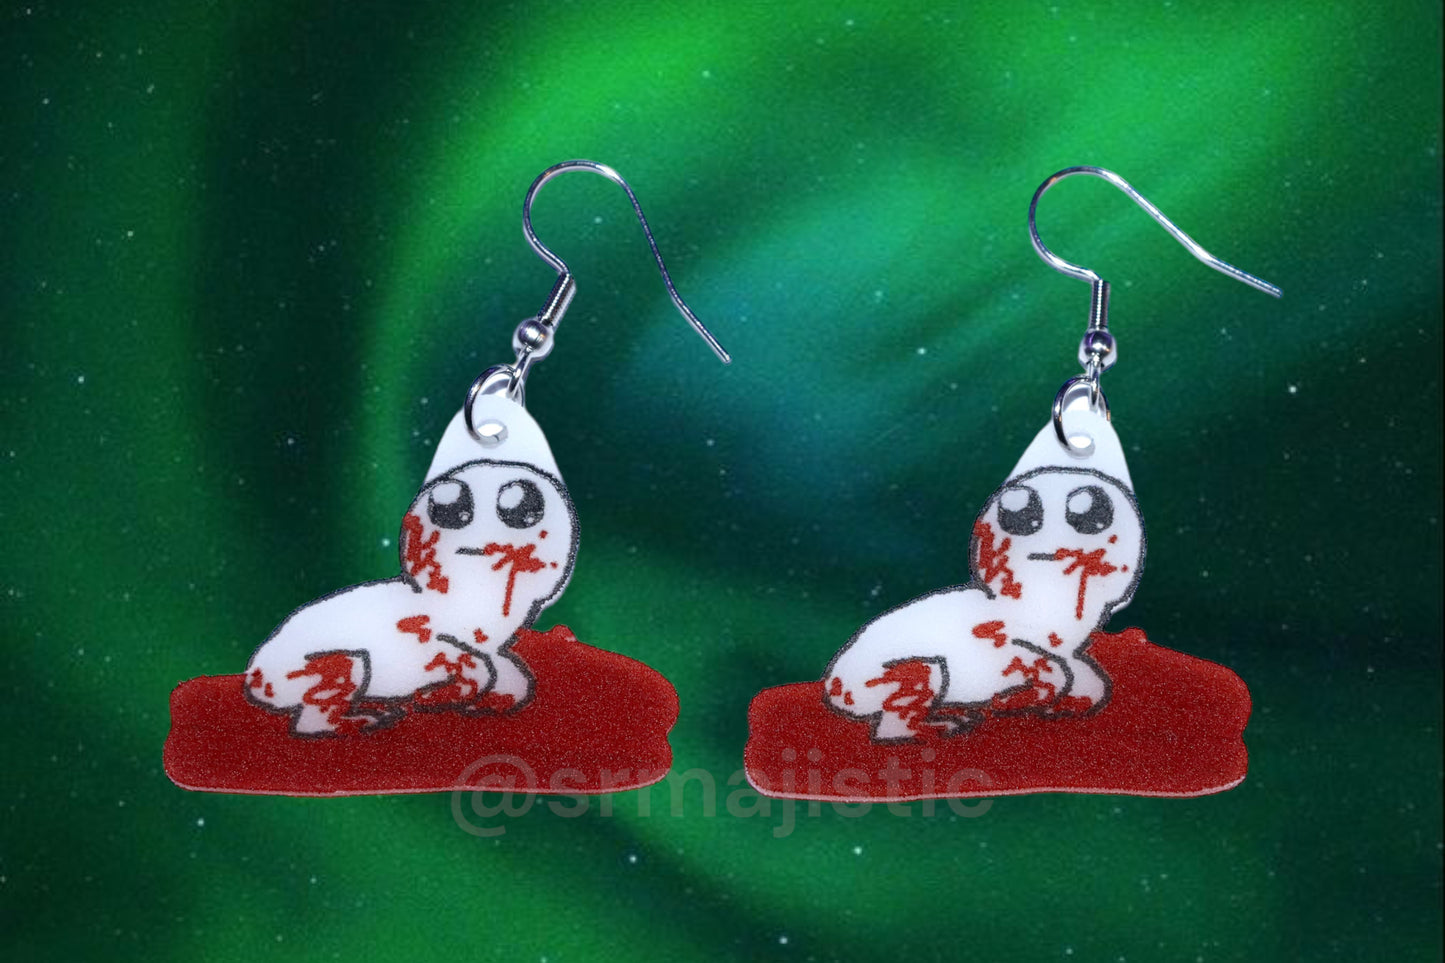 Autism/TBH Creature in Blood Meme Funny Handmade Earrings!